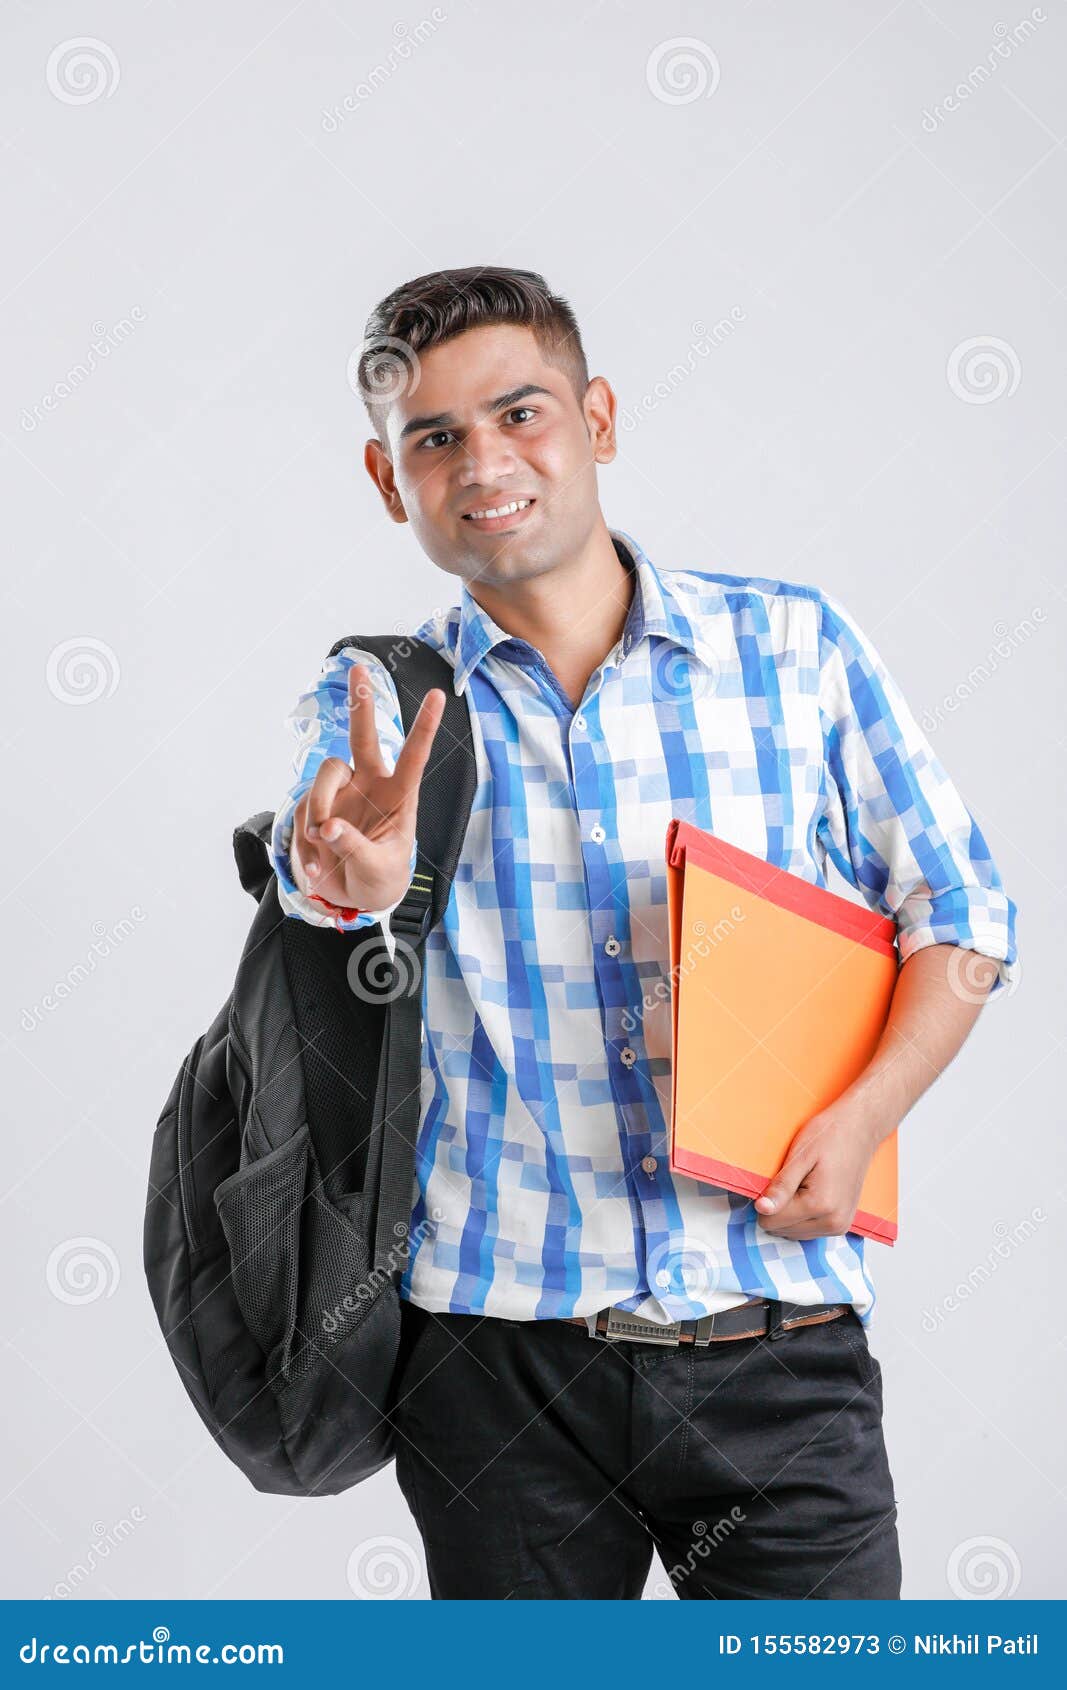 Happy Indian College Boy with Holding Bag Stock Image - Image of dress ...